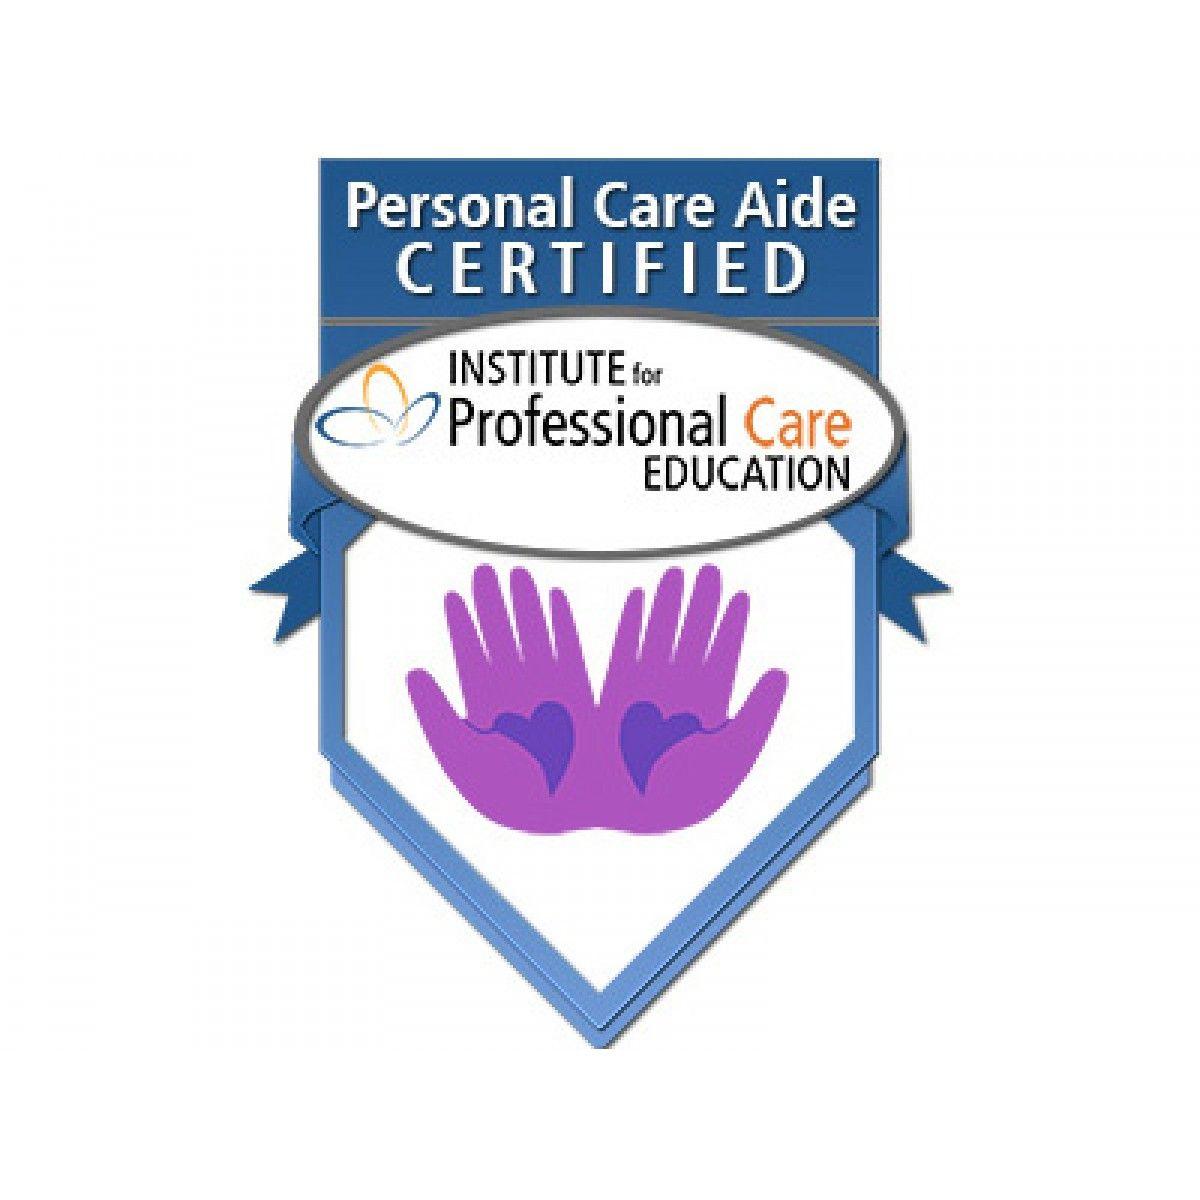 Personal Care Aide Logo - Personal Care Aide Certification